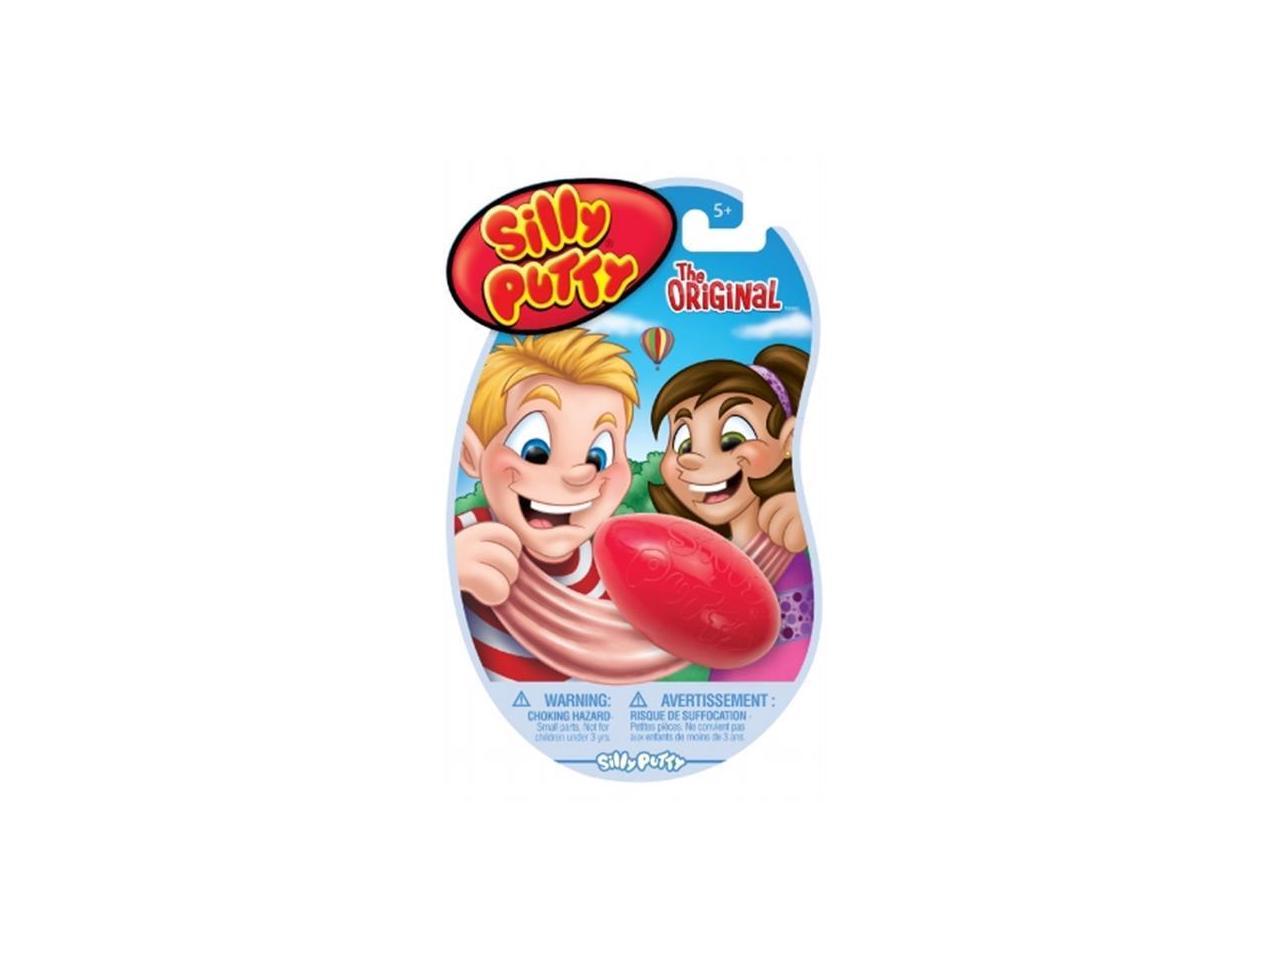 Download 45+ Products Original Silly Putty Product Coloring Pages PNG